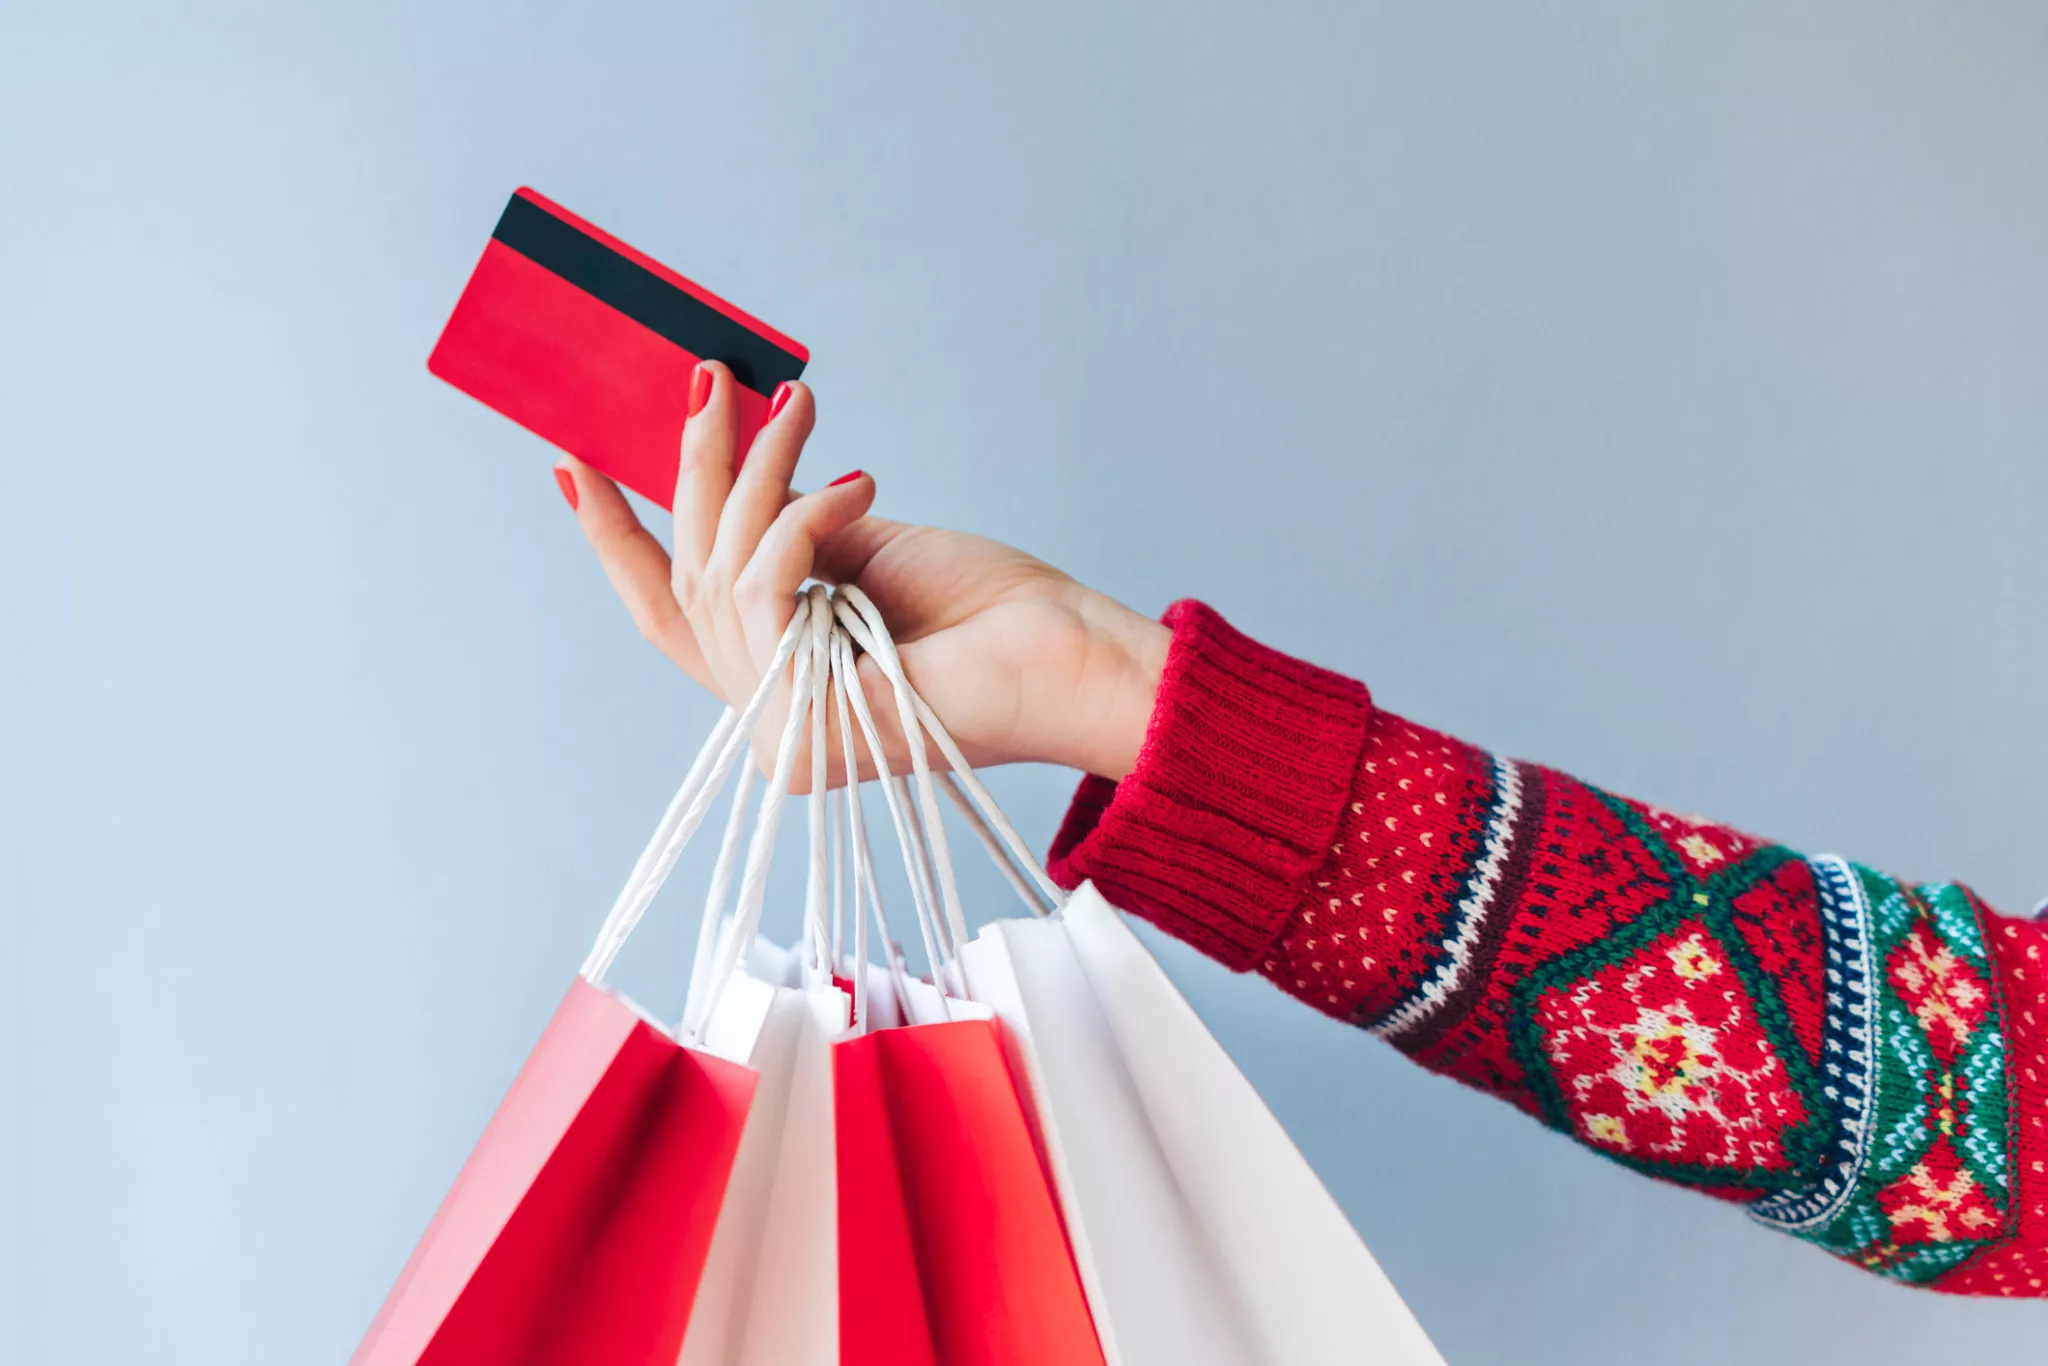 “New Normal” Holiday Shopping Trends - Sachs Marketing Group